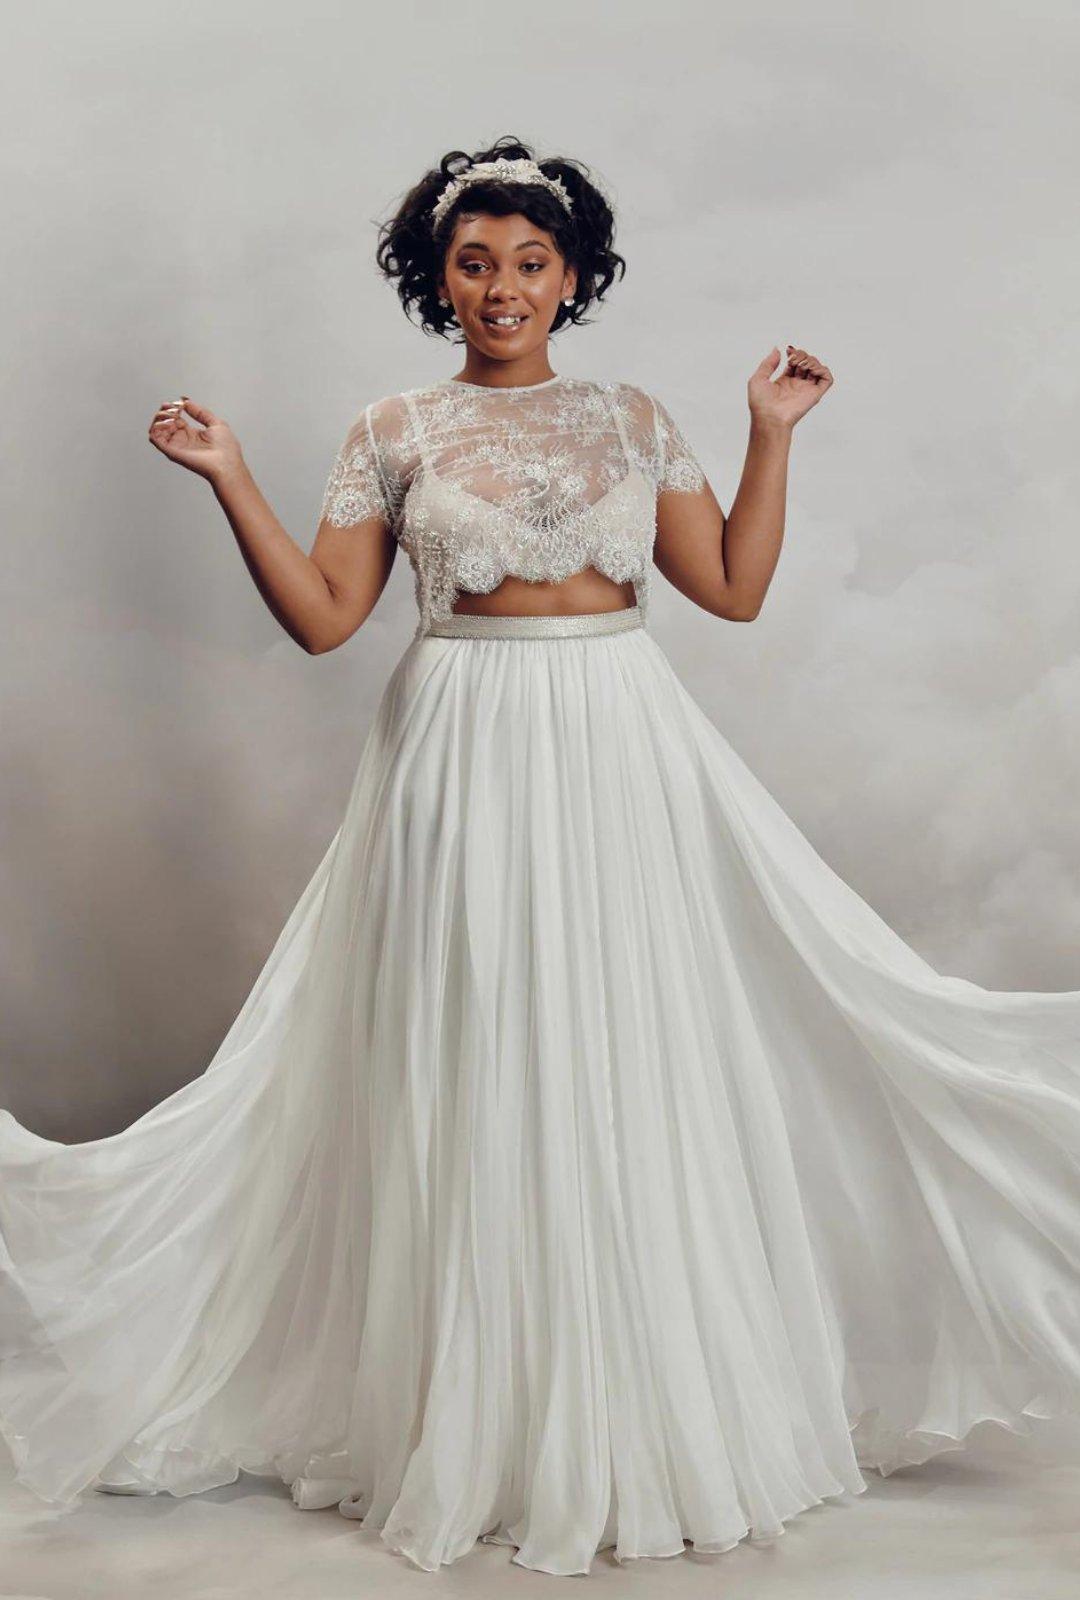 33 Best Two-Piece Wedding Dresses & Bridal Separates - hitched.co.uk -  hitched.co.uk